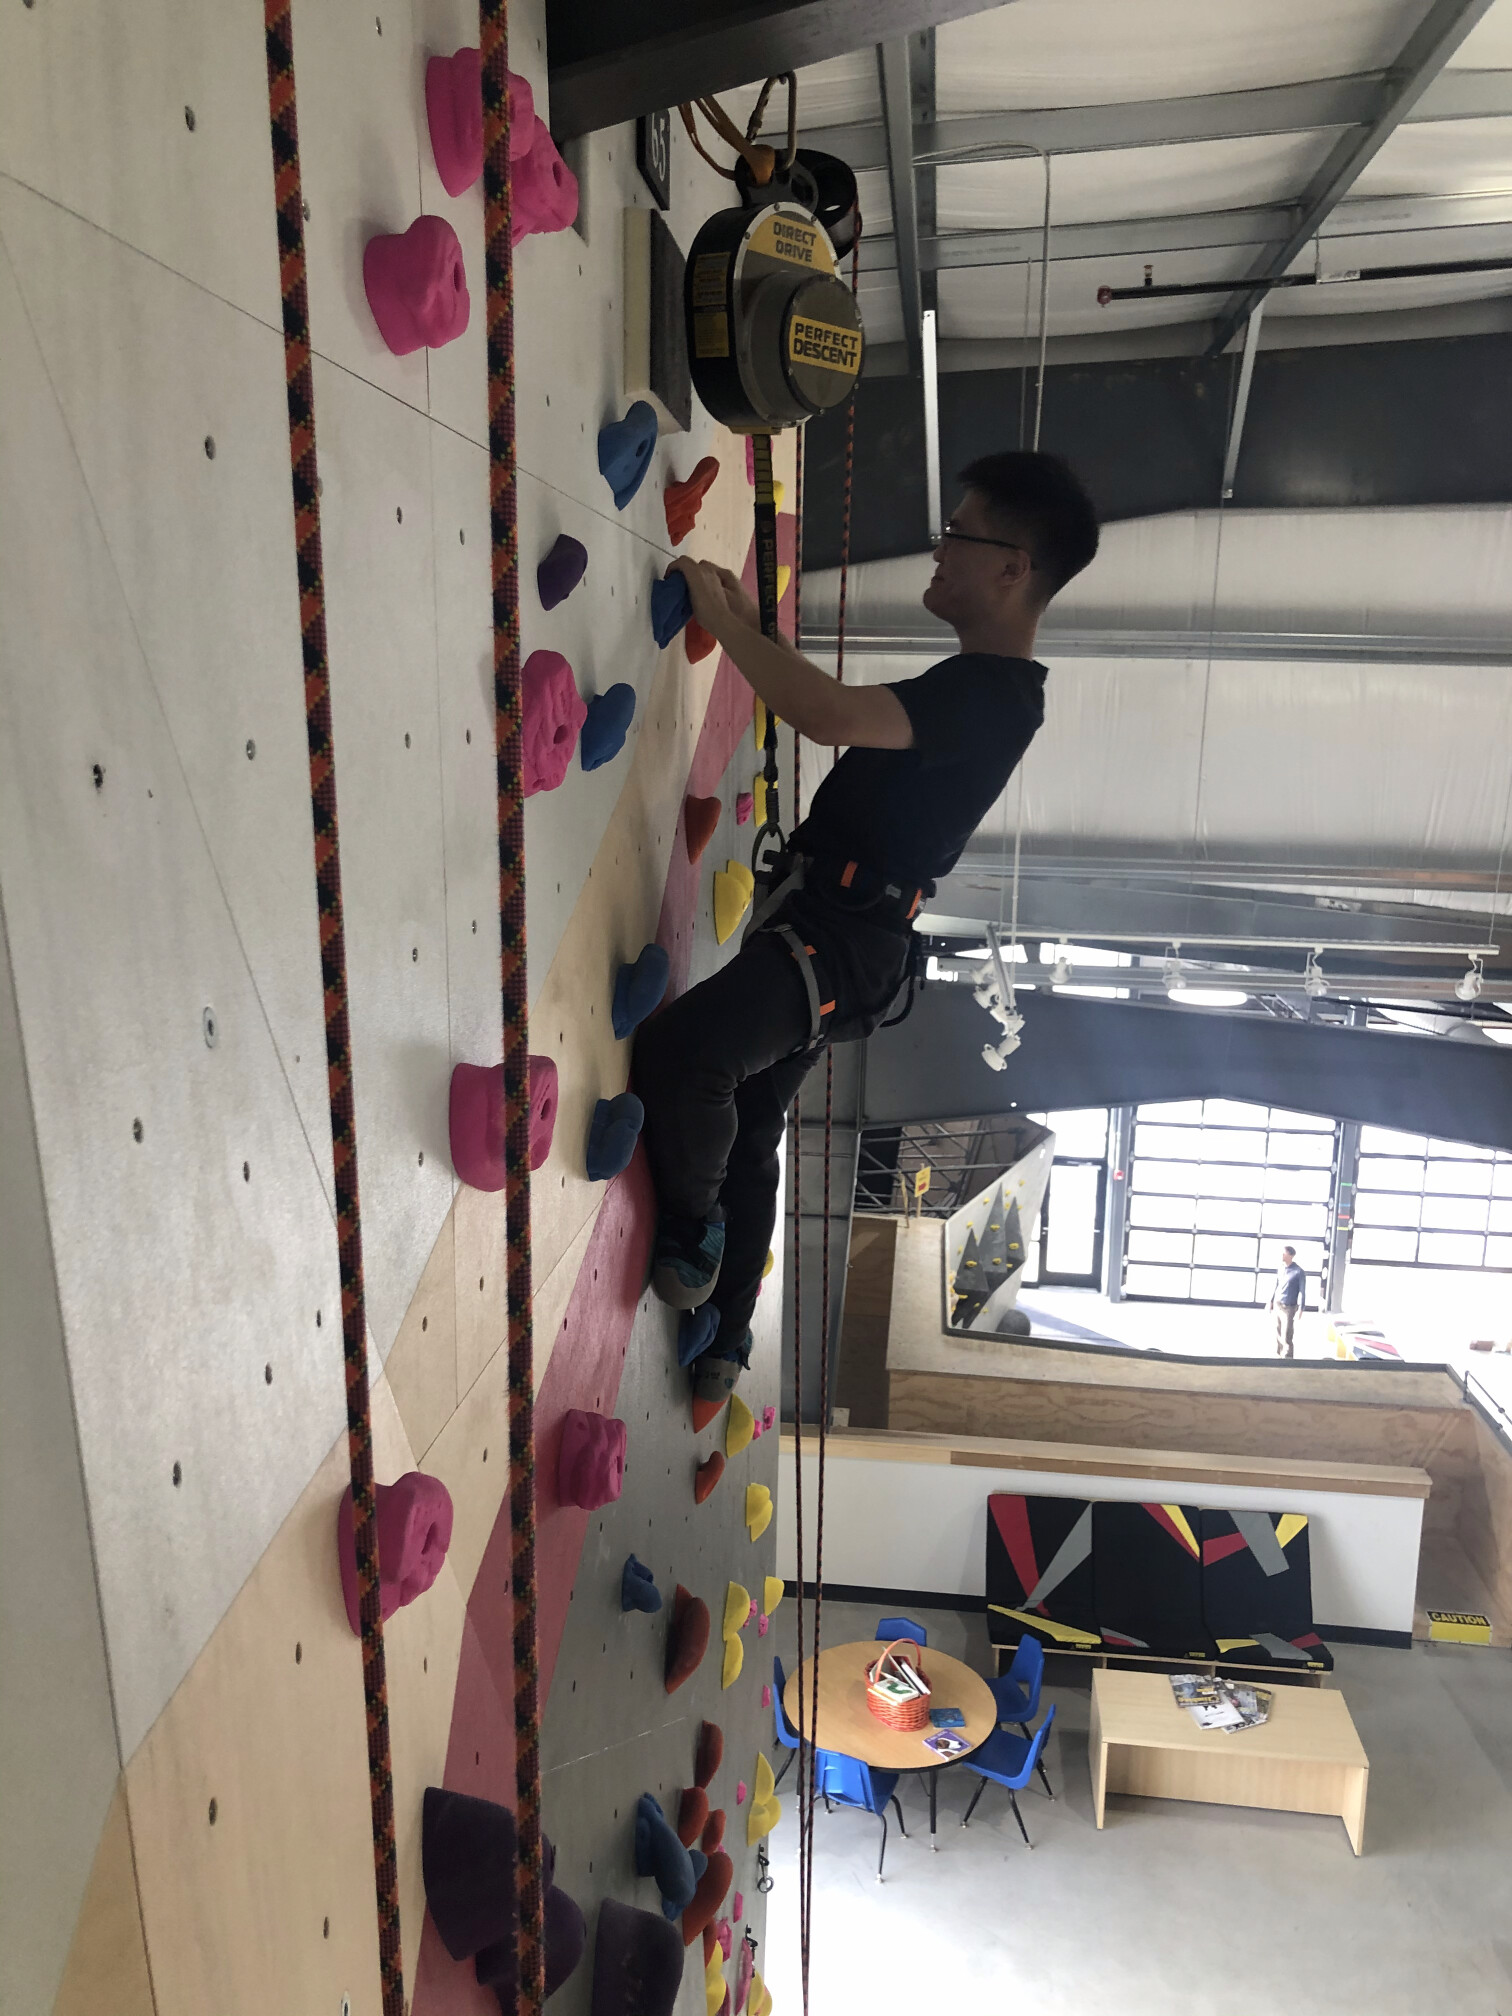 The group went climbing with the Crespo group in December 2019